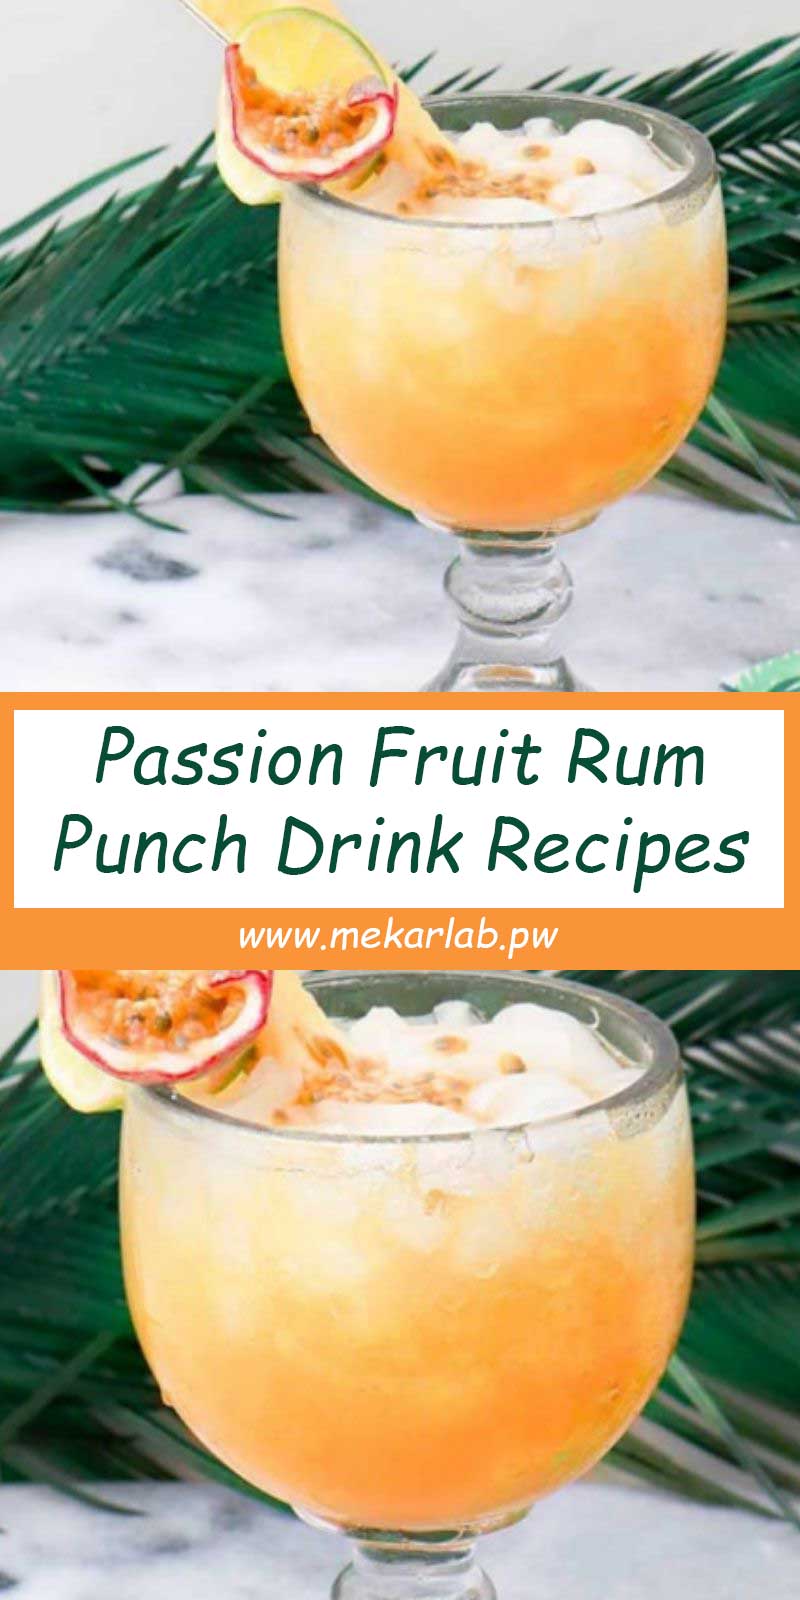 Passion Fruit Rum Punch Drink Recipes